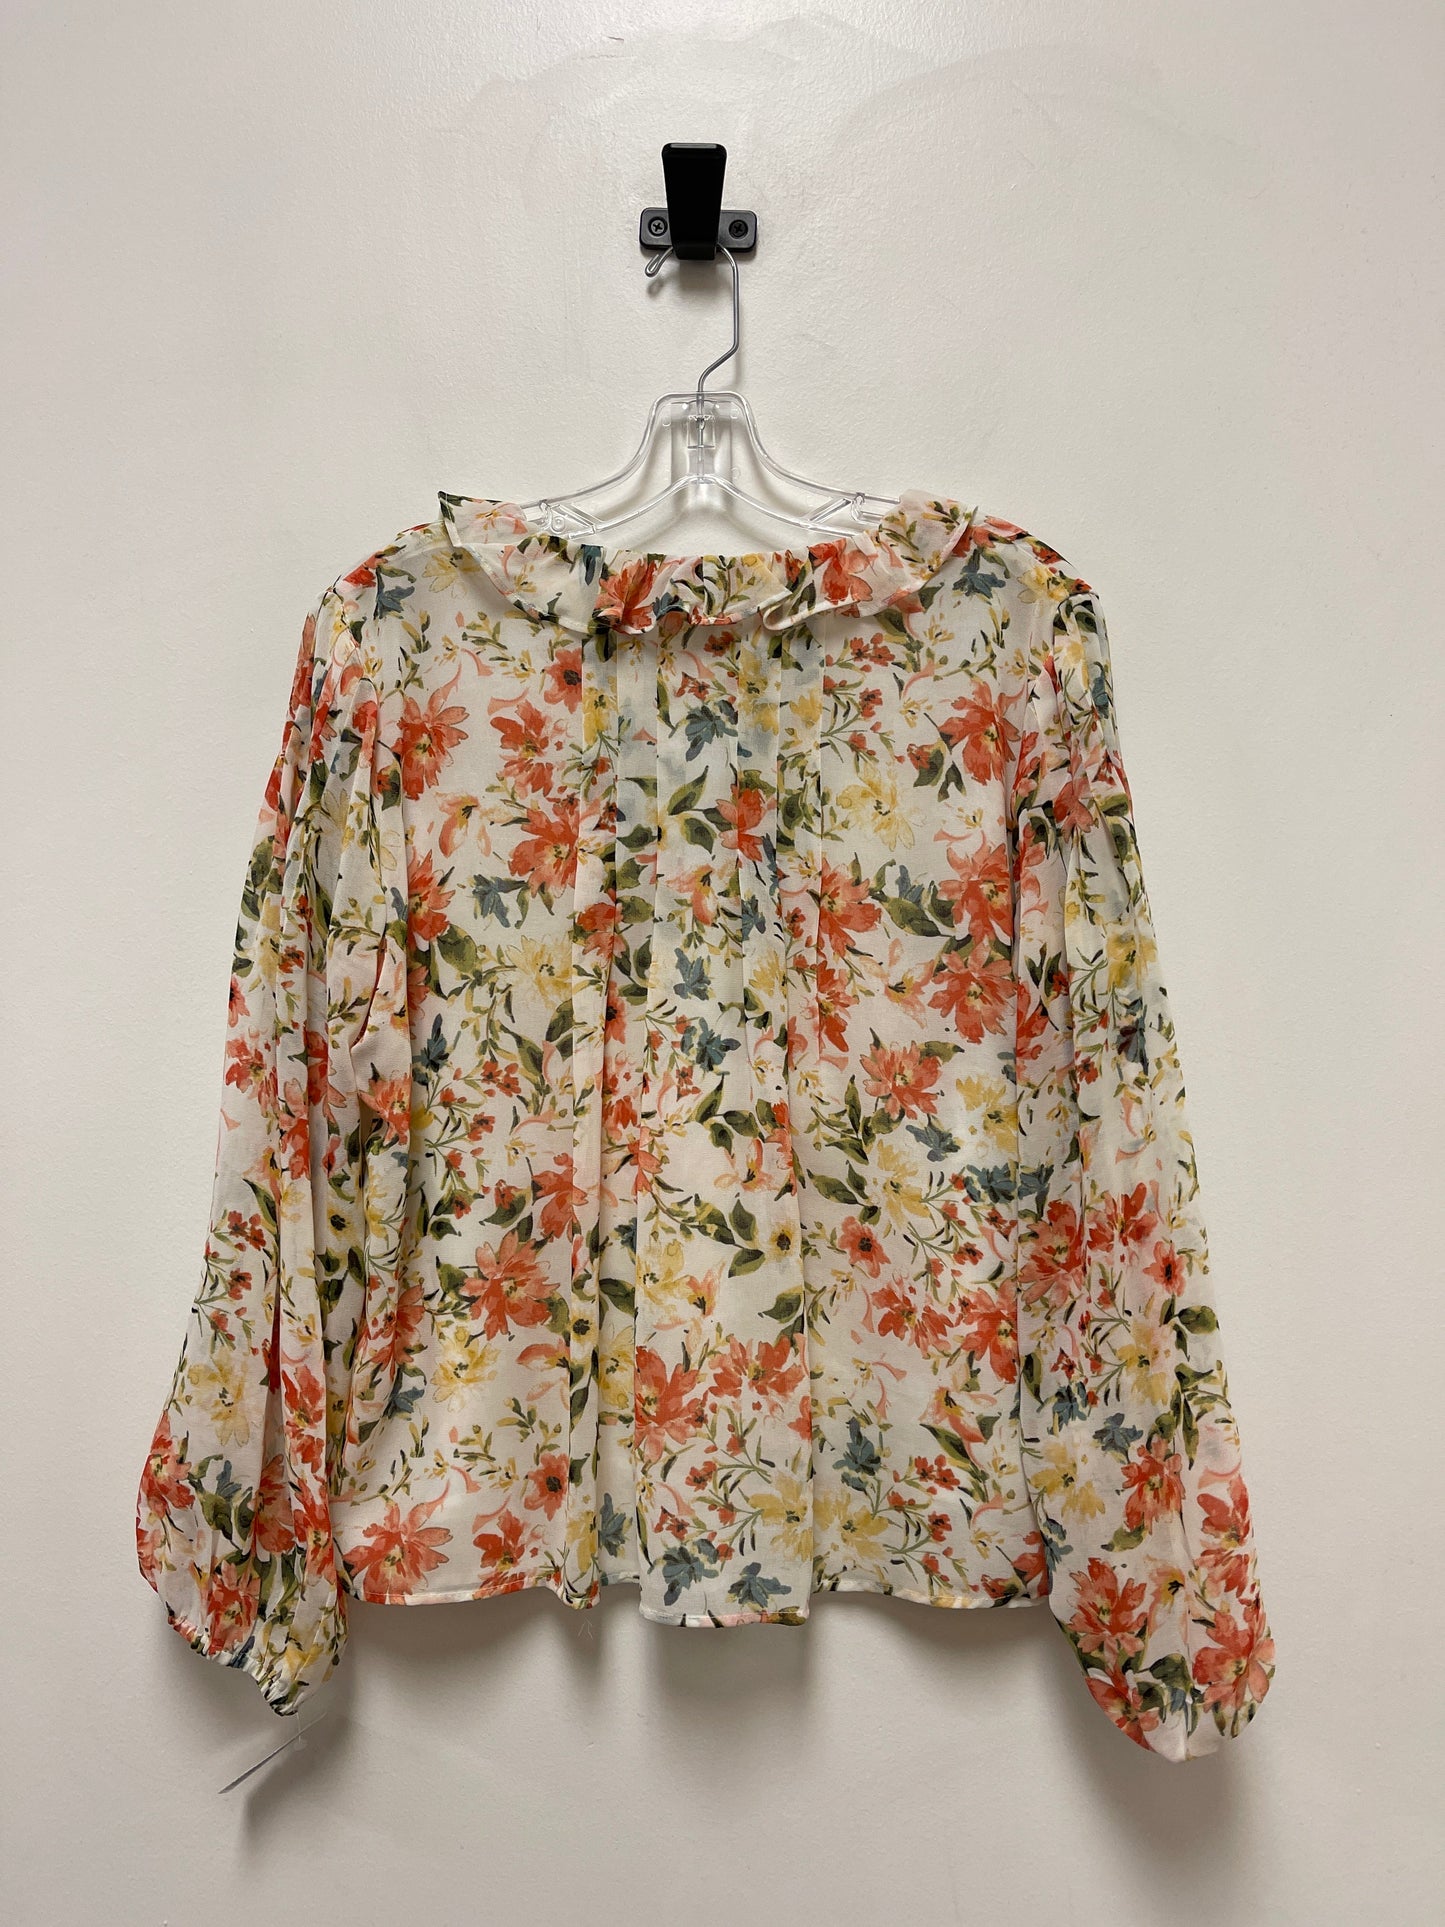 Cream Top Long Sleeve 1.state, Size S